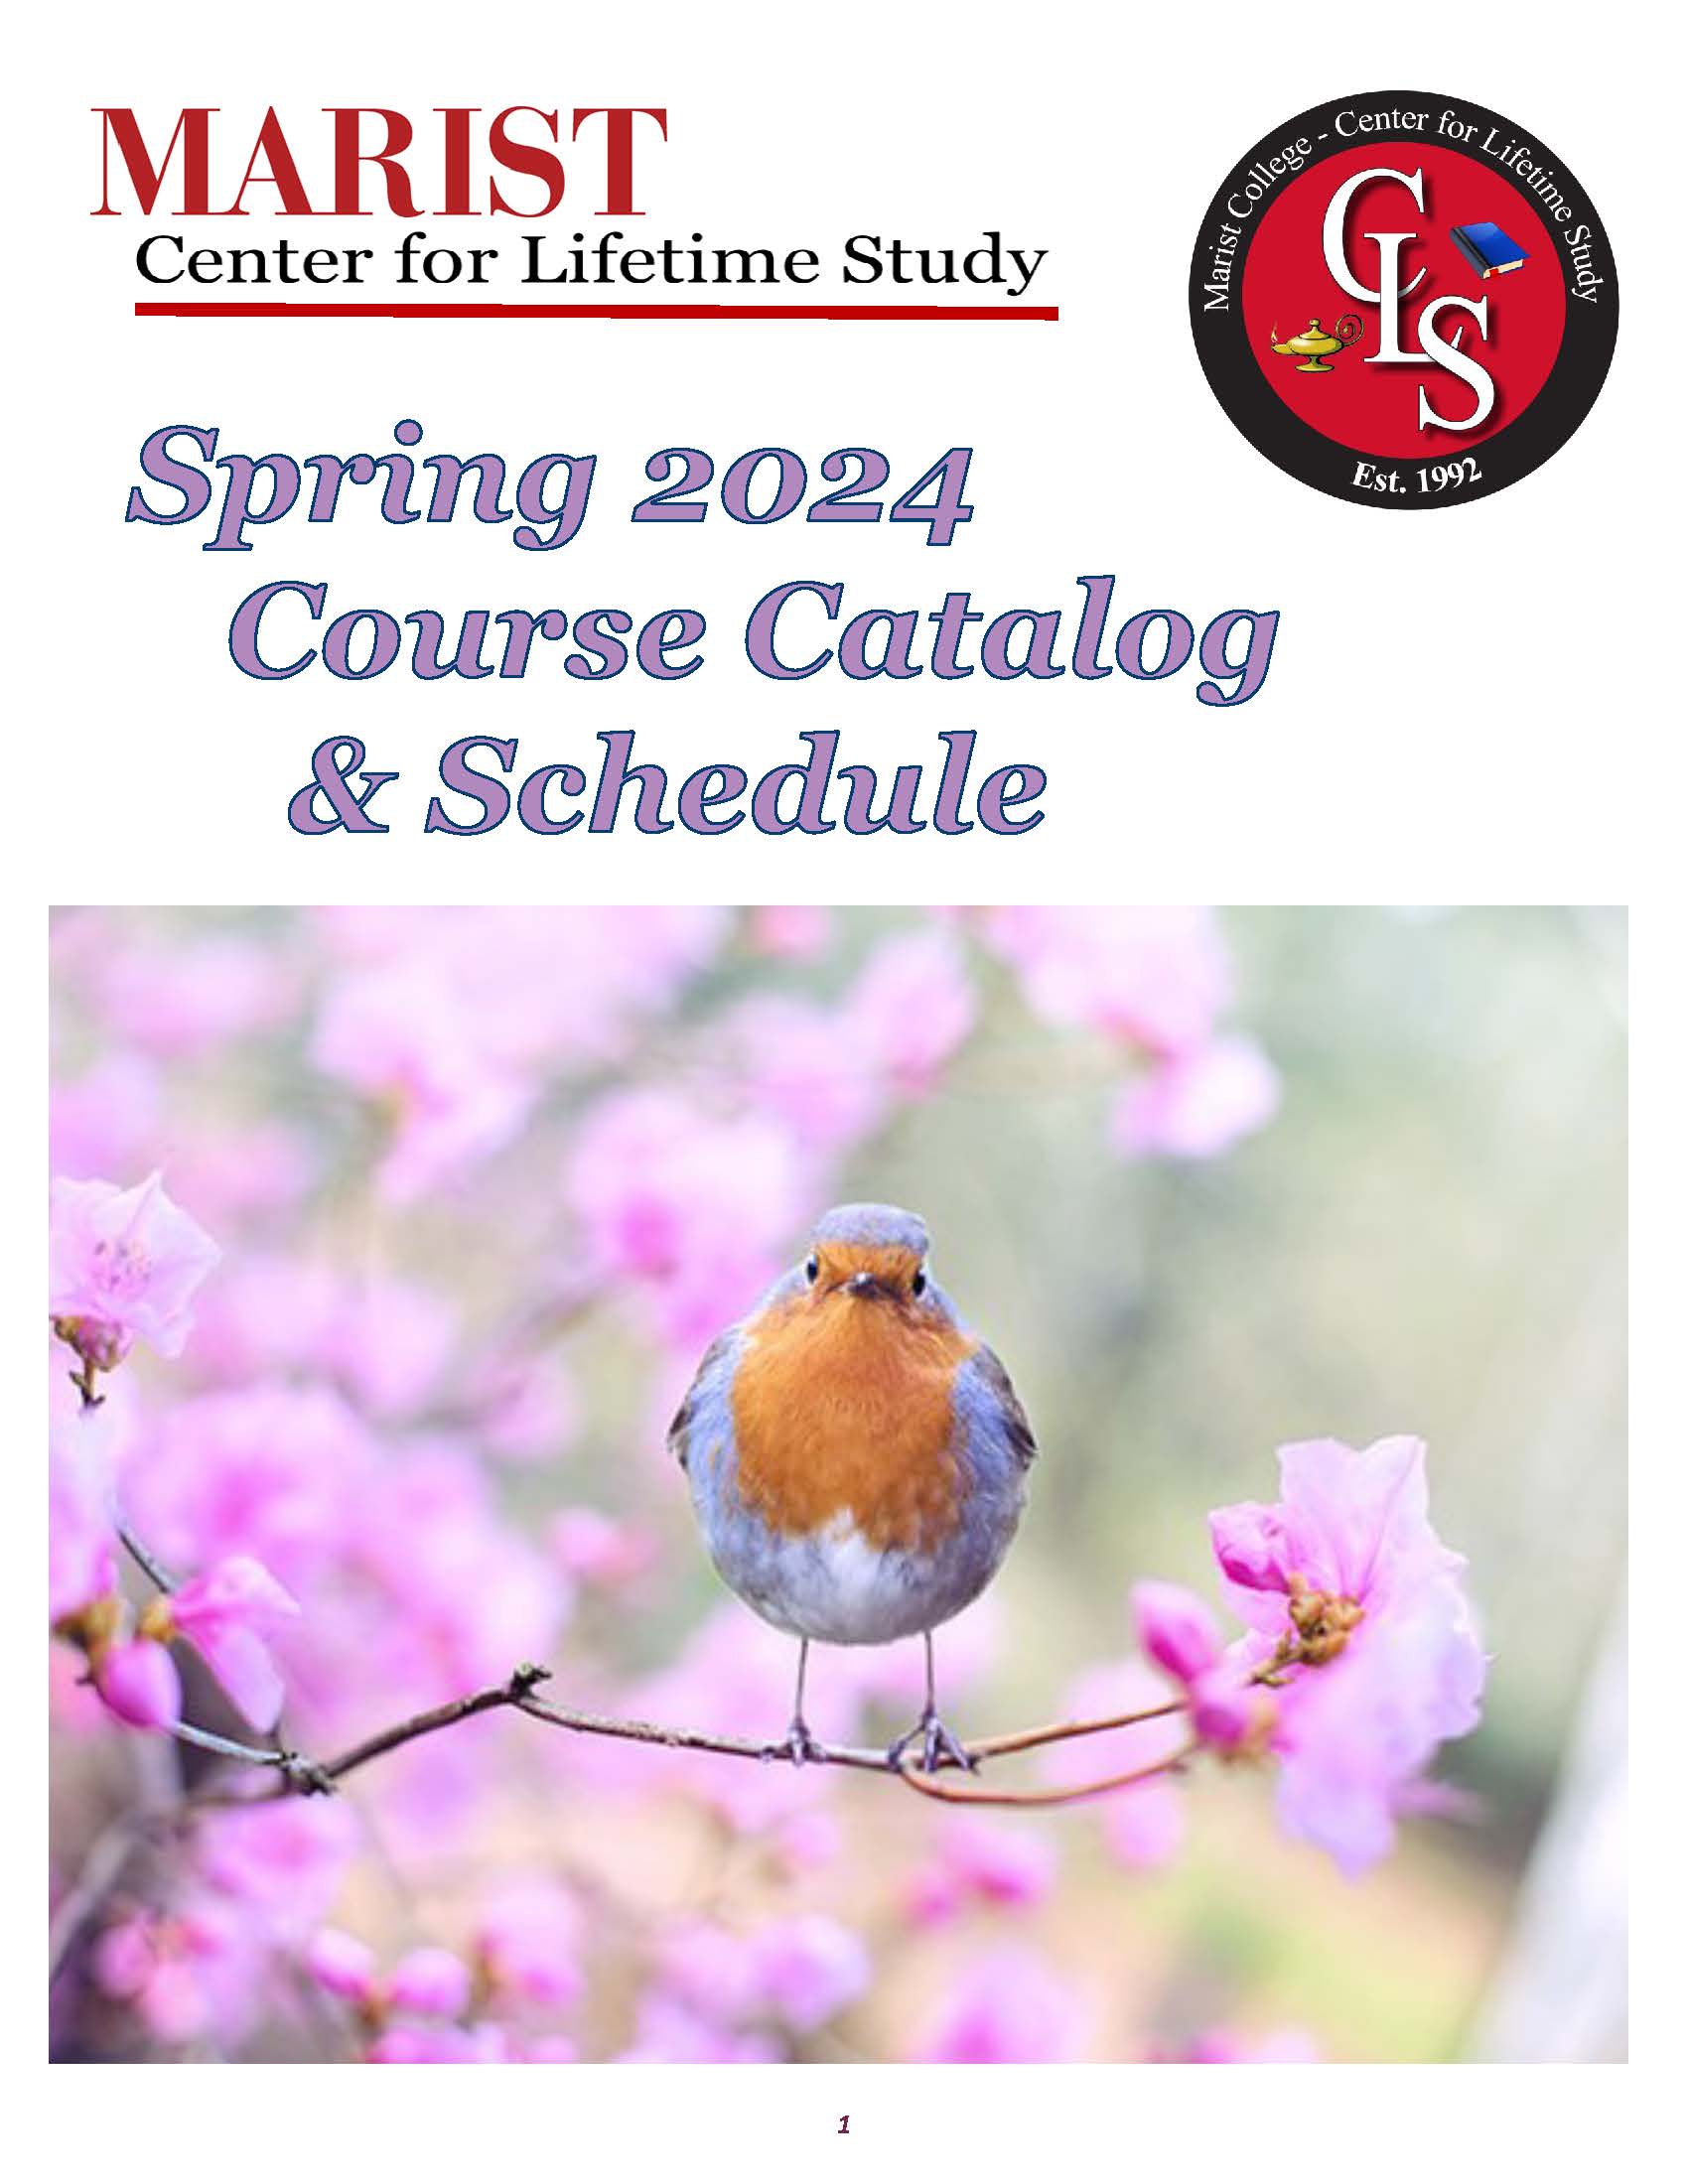 image of the cover for the CLS spring 2024 course catalog